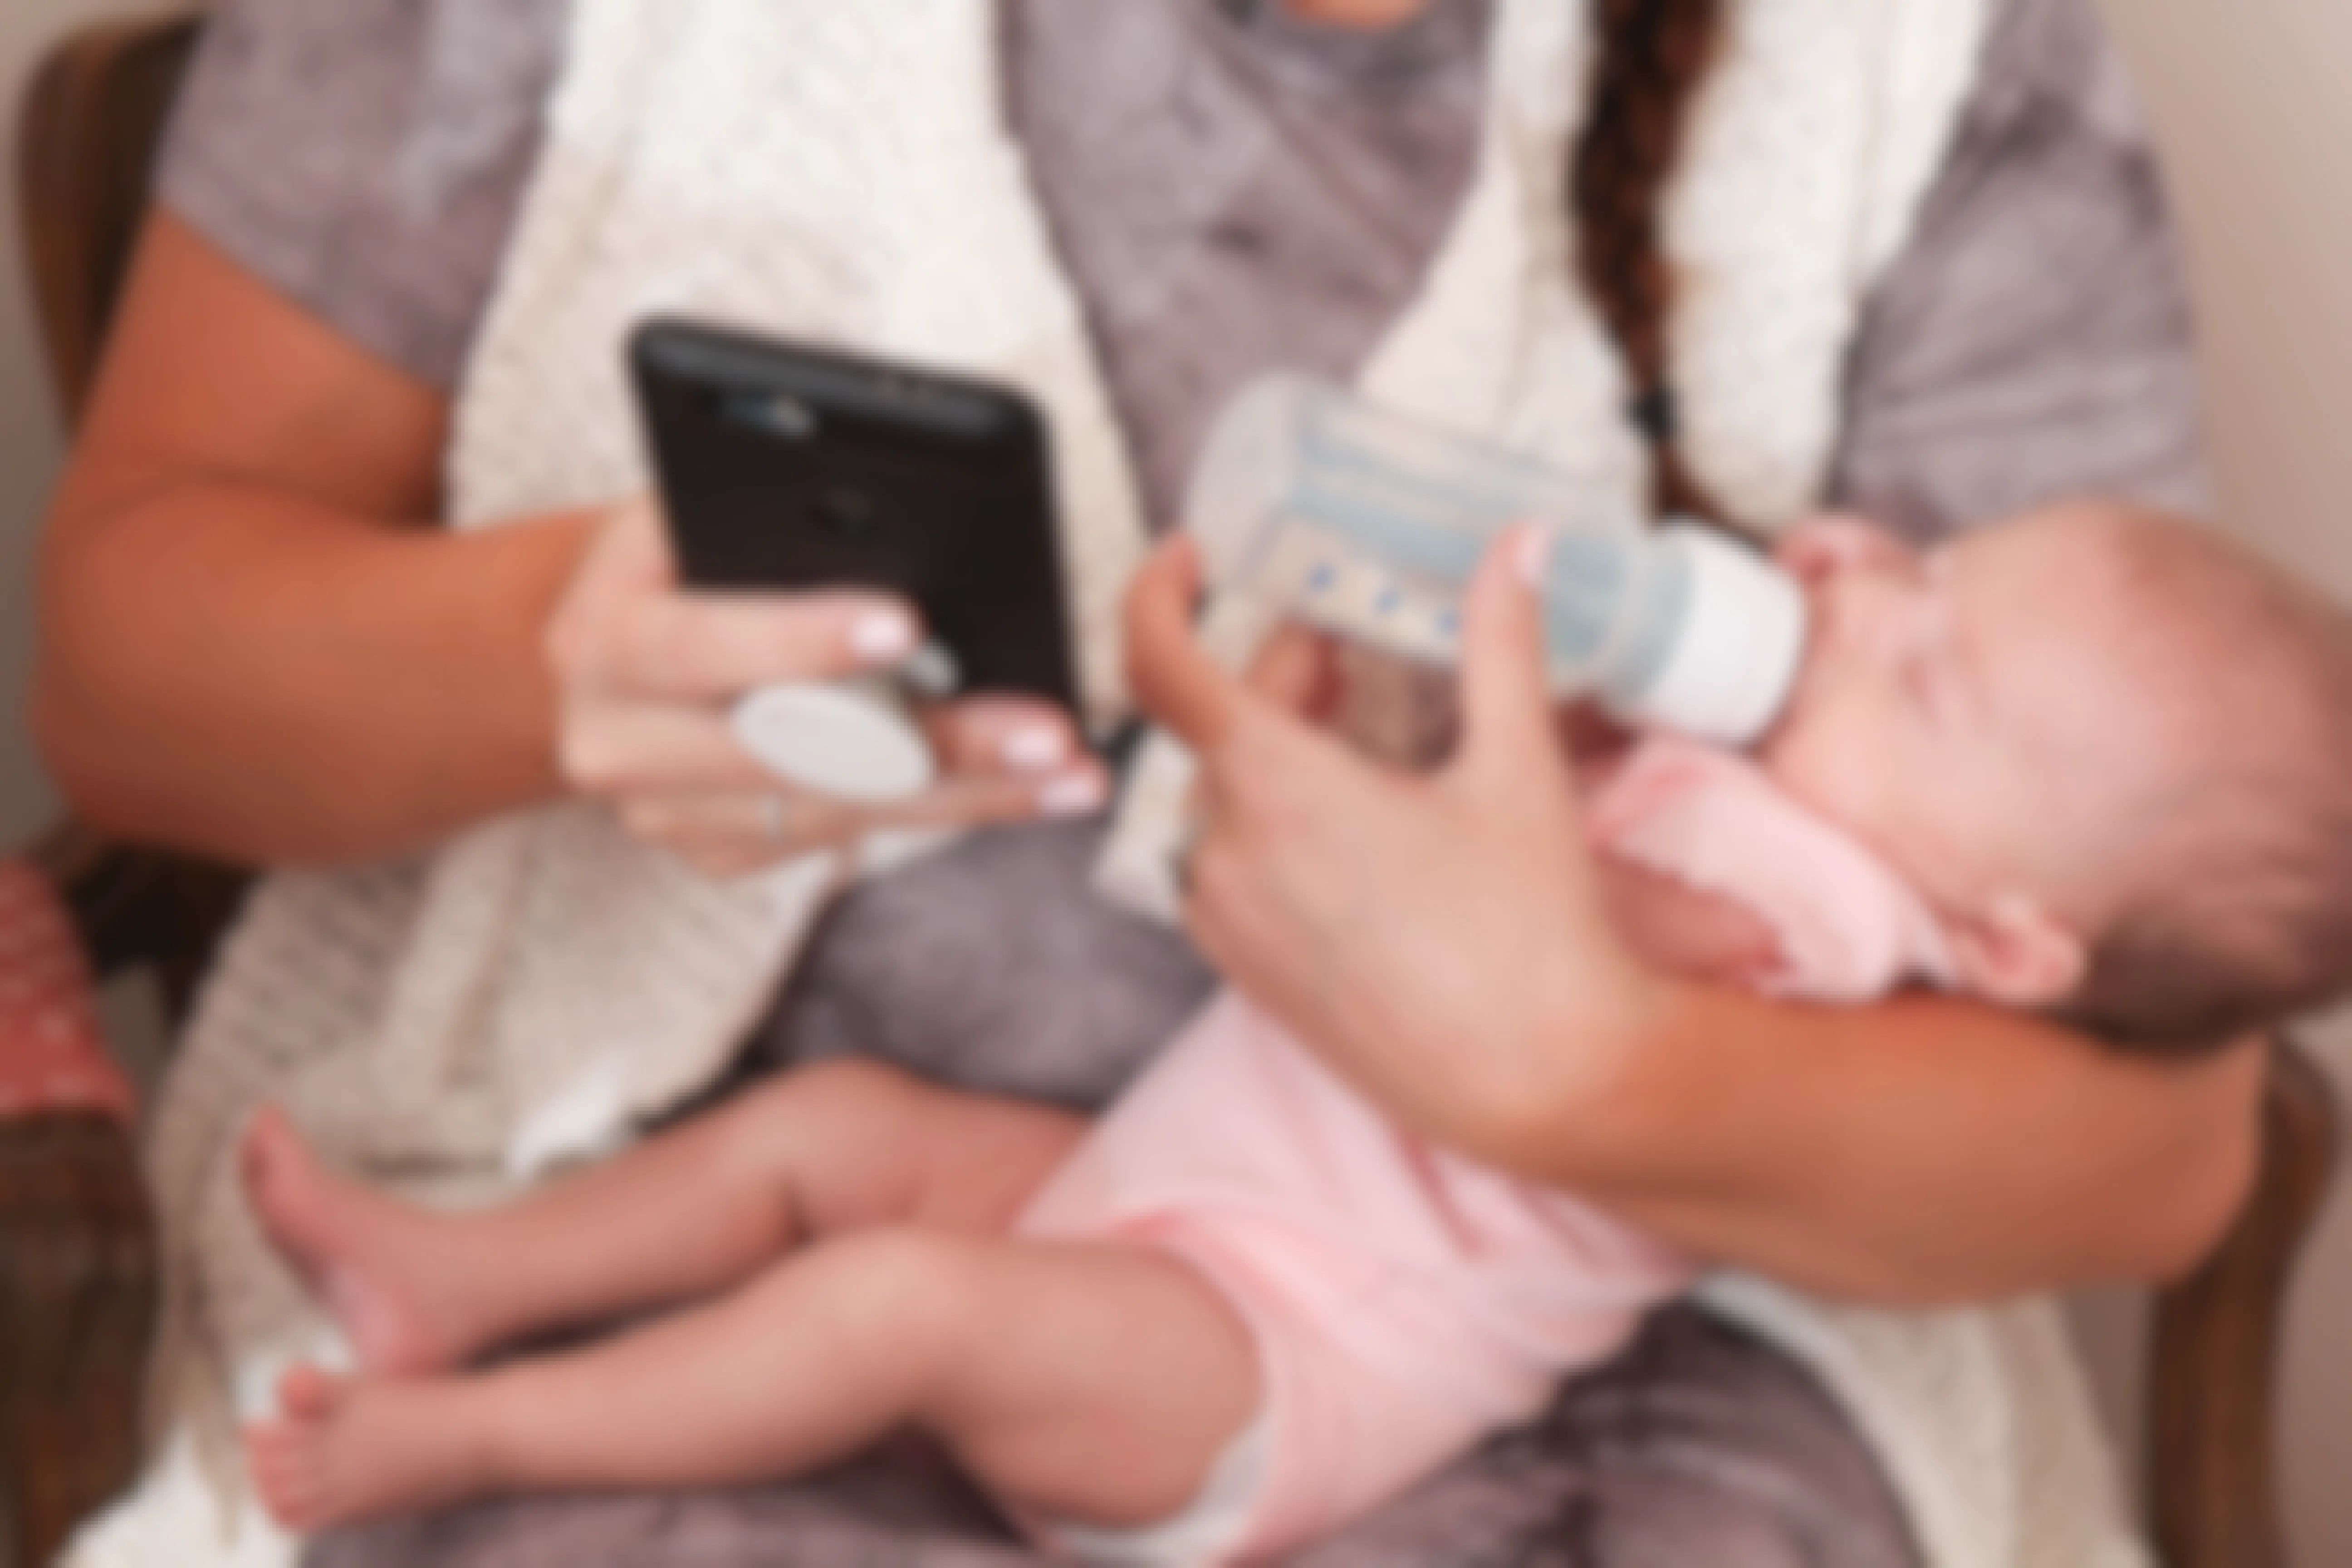 A mother sitting down and feeding a bottle to her baby while looking at her cellphone.